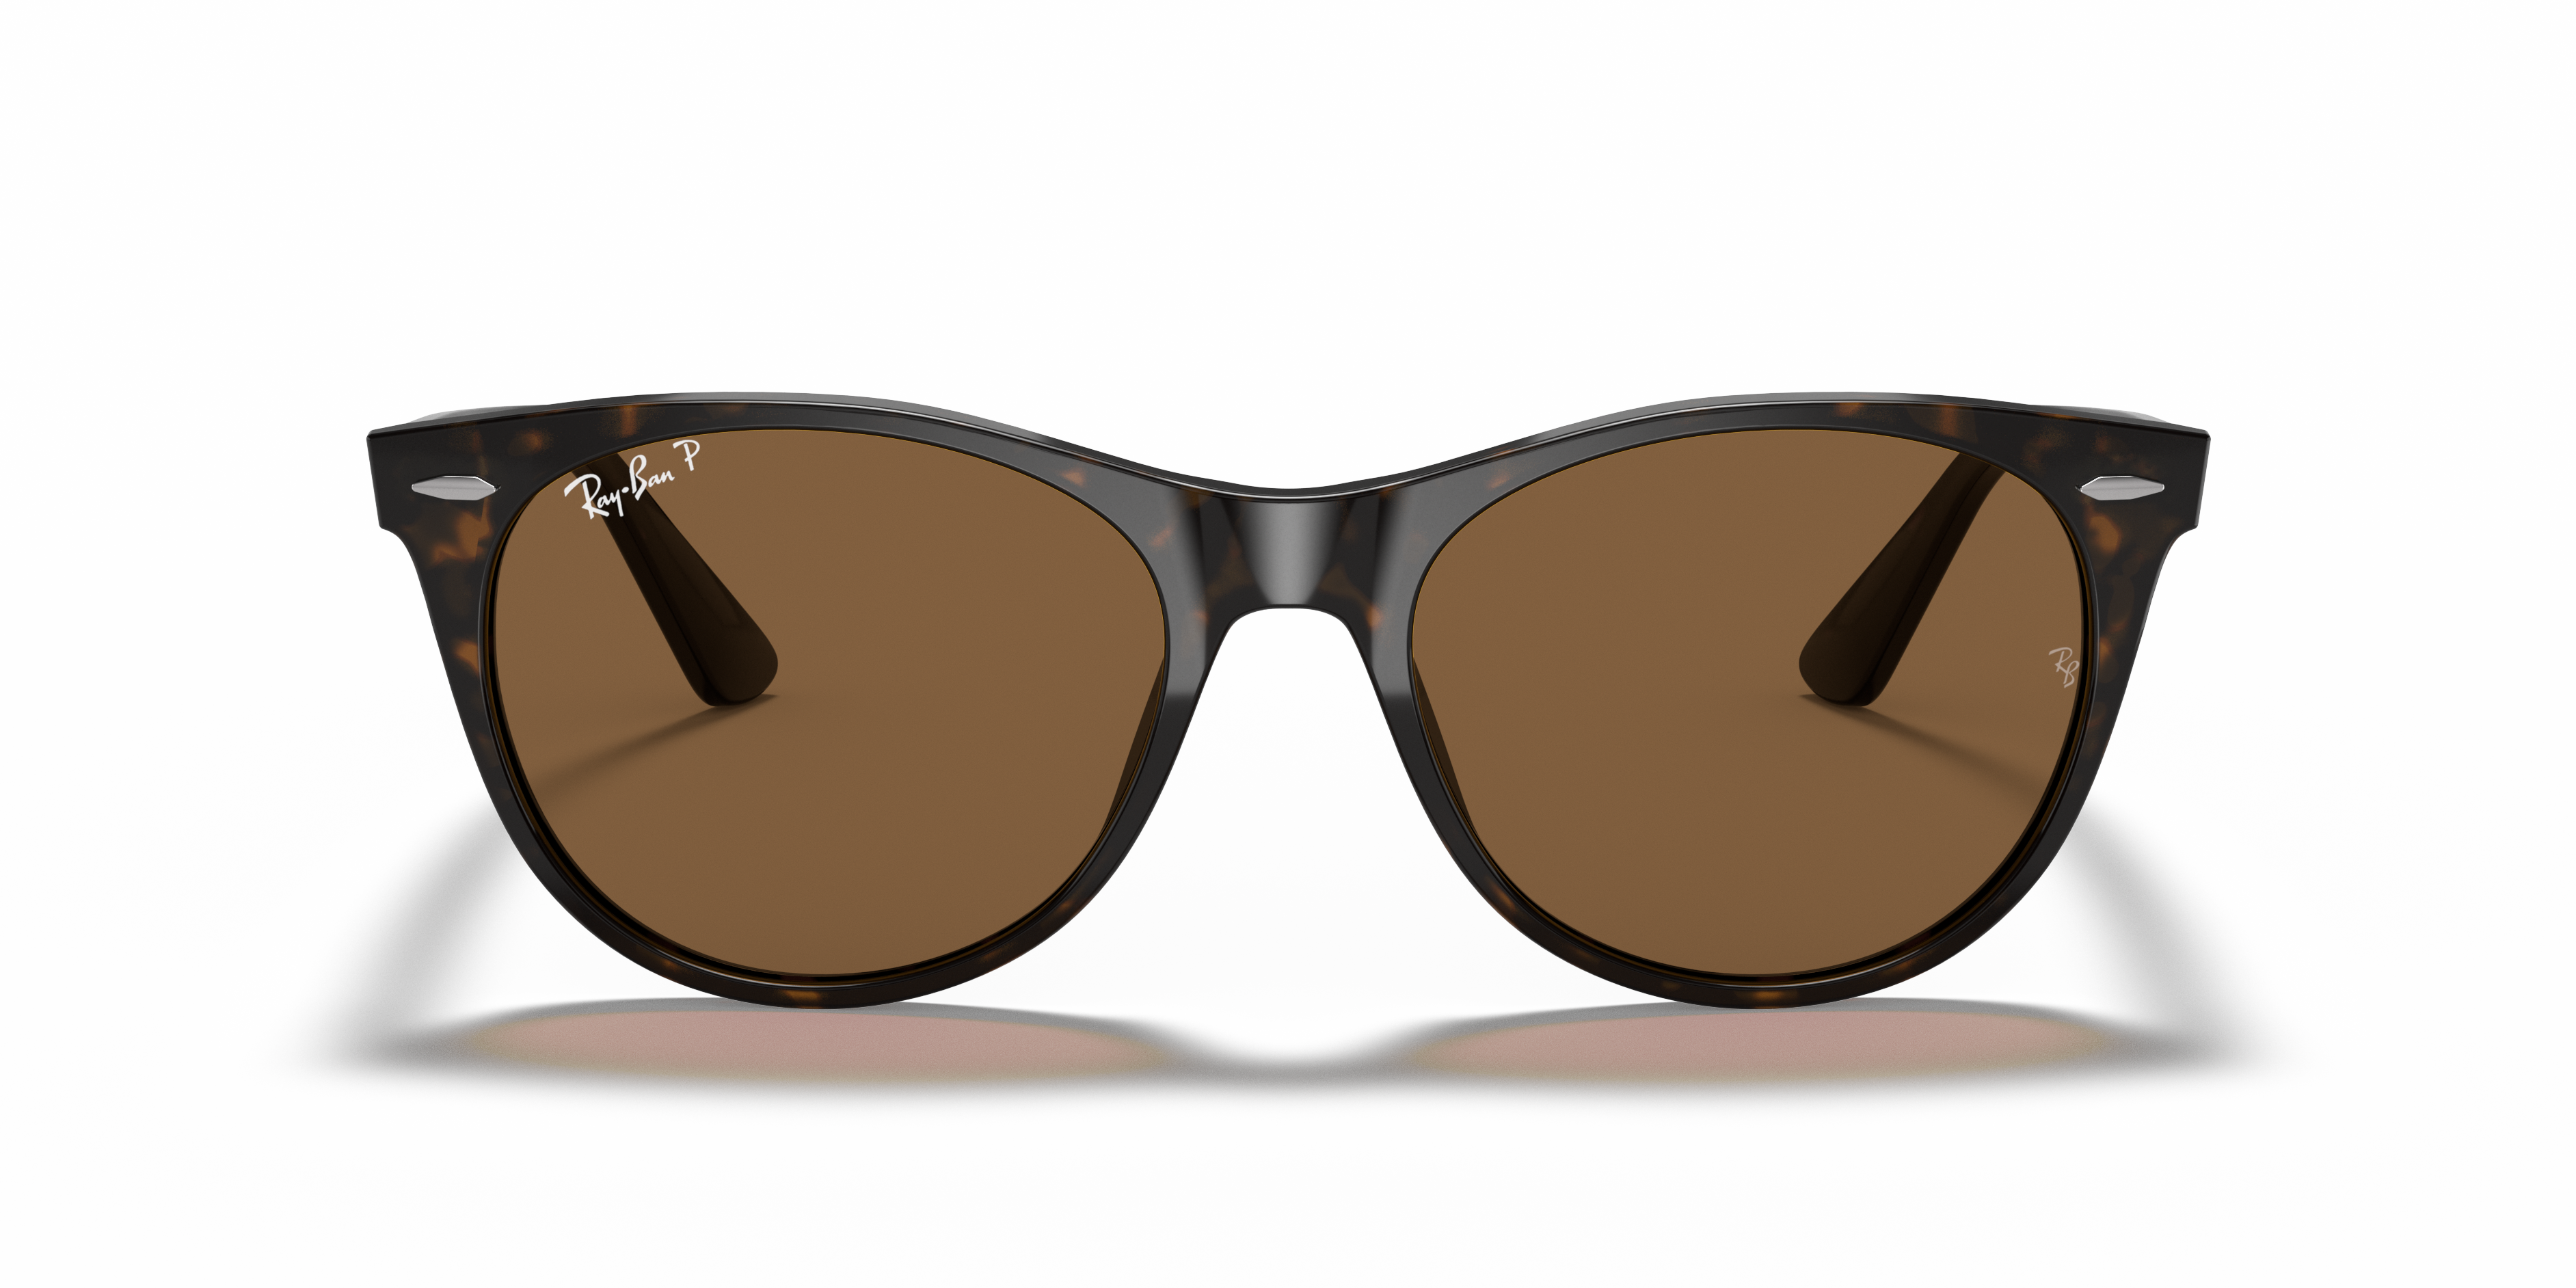 Check out the Wayfarer Ii Classic at ray-ban.com